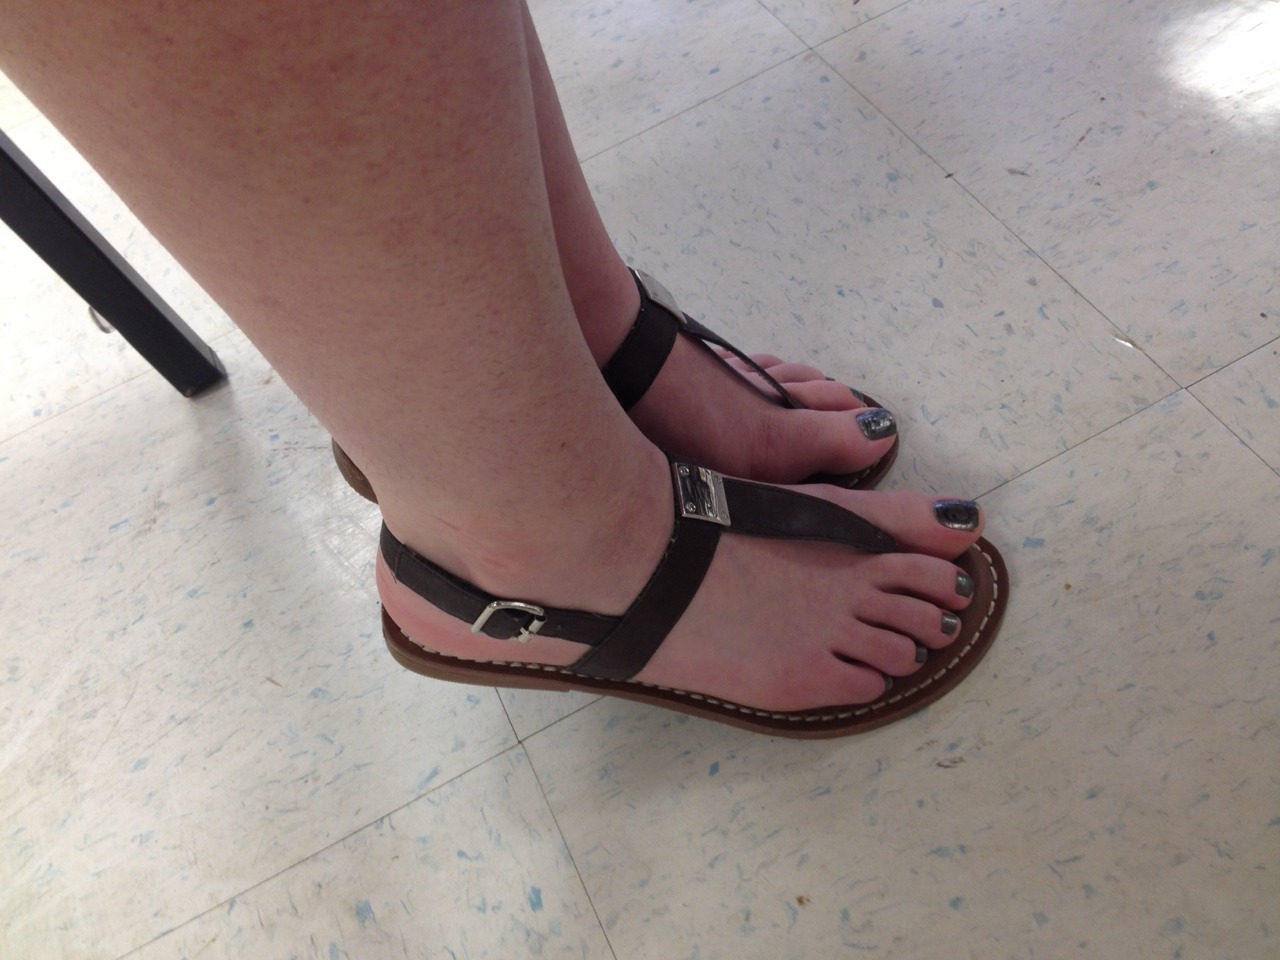 Kittehfeets New American Eagle Sandals Its